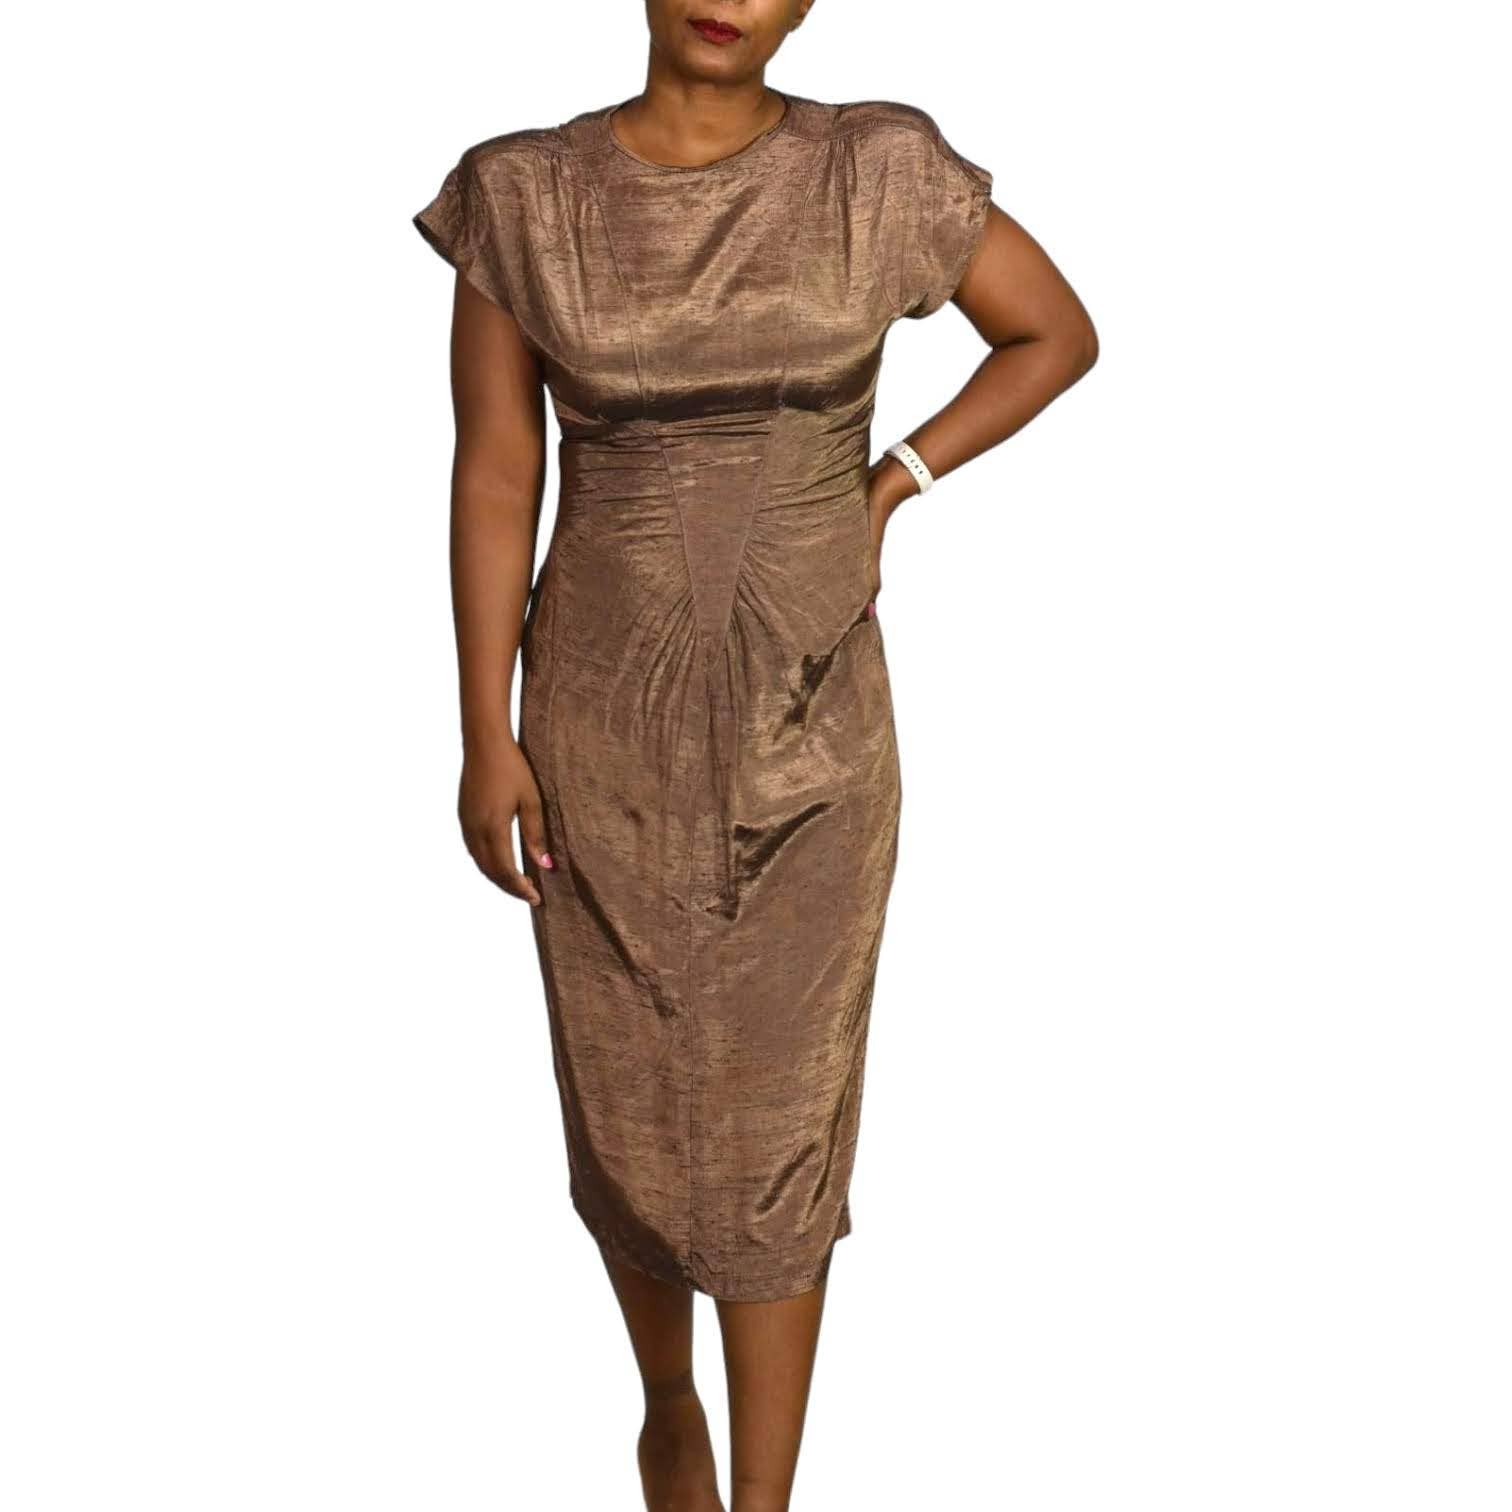 All That Jazz Dress Vintage Brown Bronze Metallic Shimmer 90s Slim Fitted Column Midi Size Small